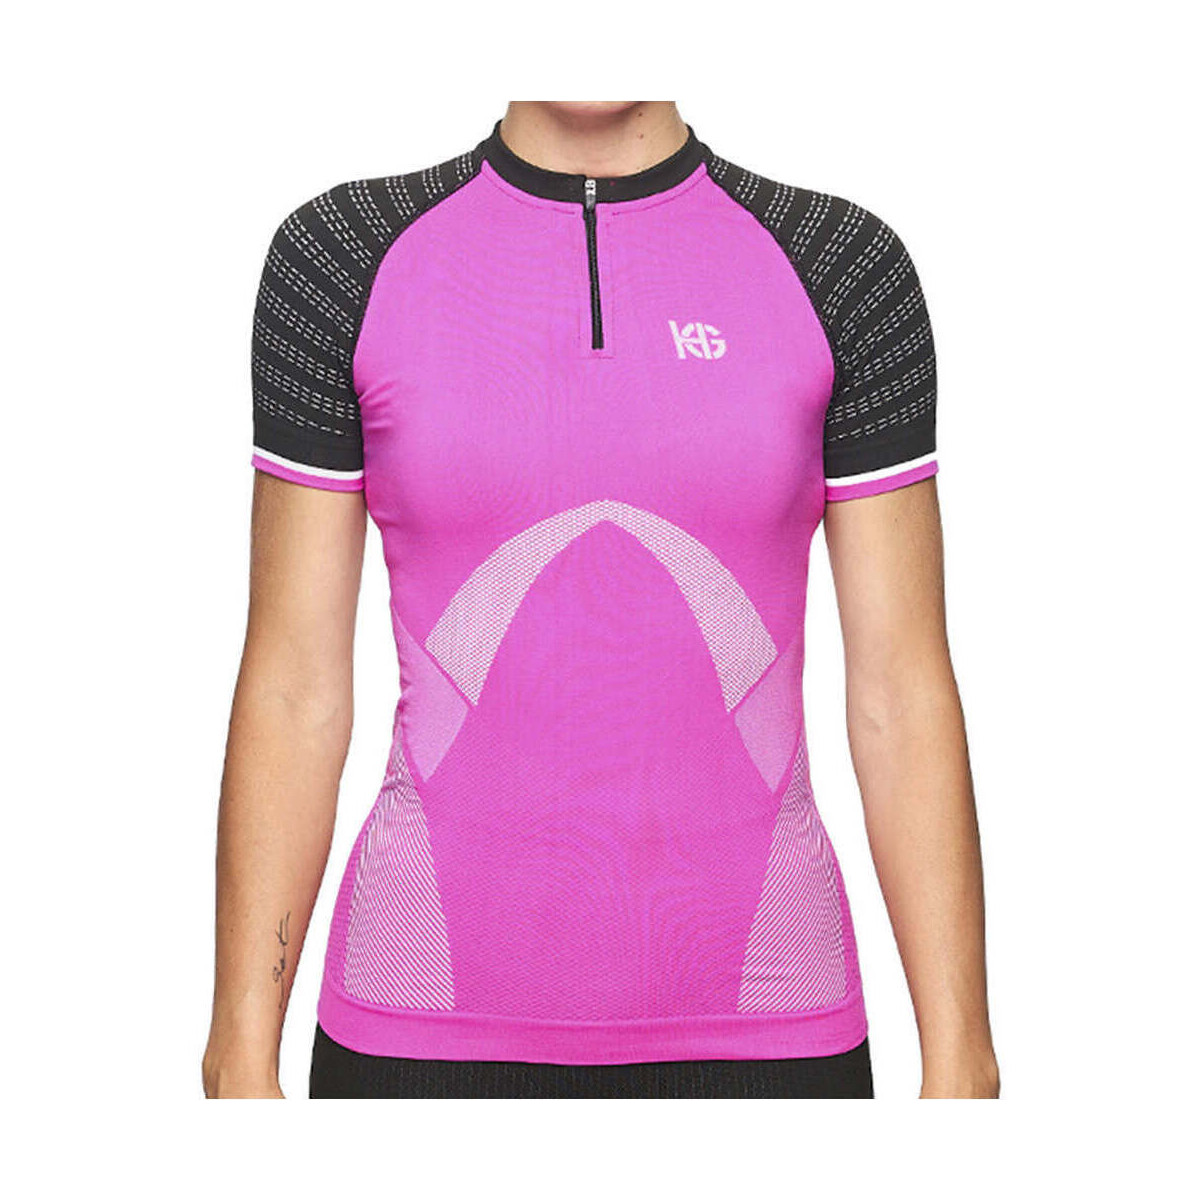 textil Mujer Camisas Sport Hg ROUTE Rosa